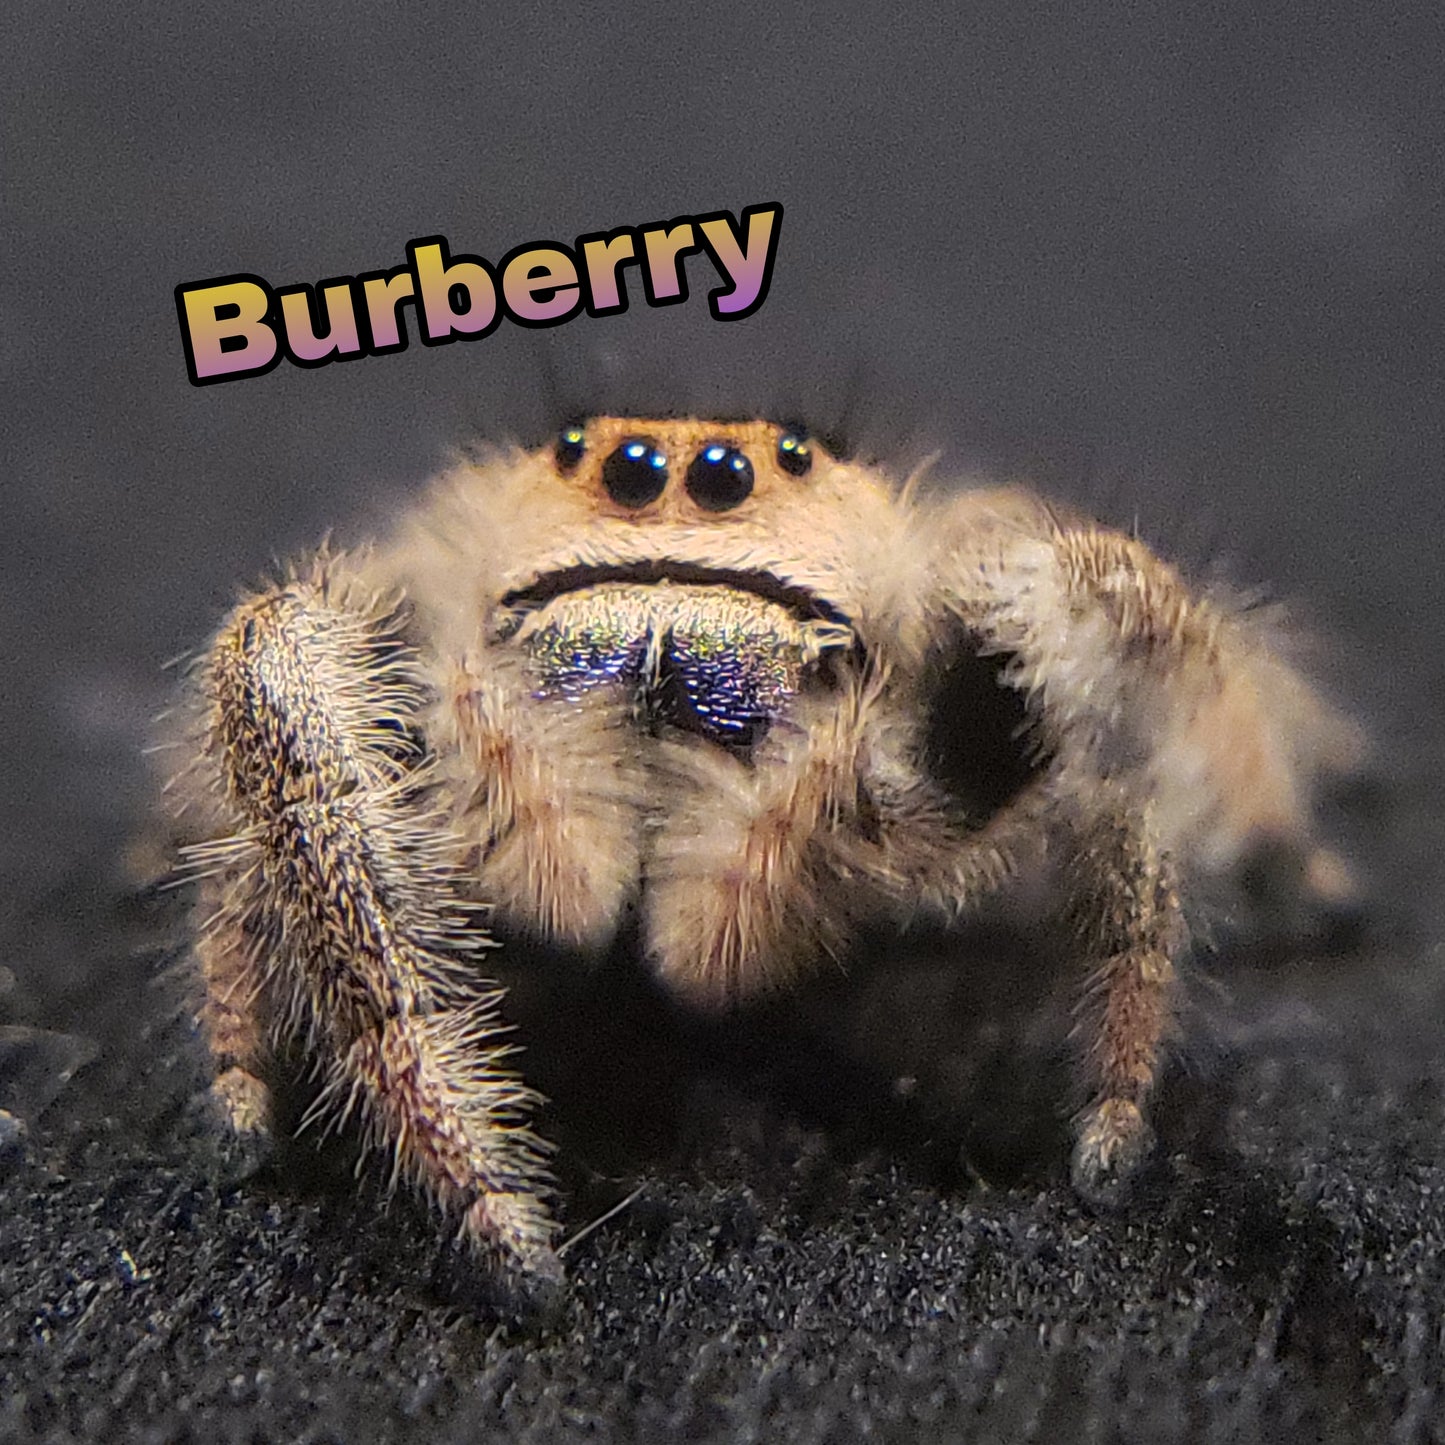 Jumping Spider For Sale, Burberry, Salticidae